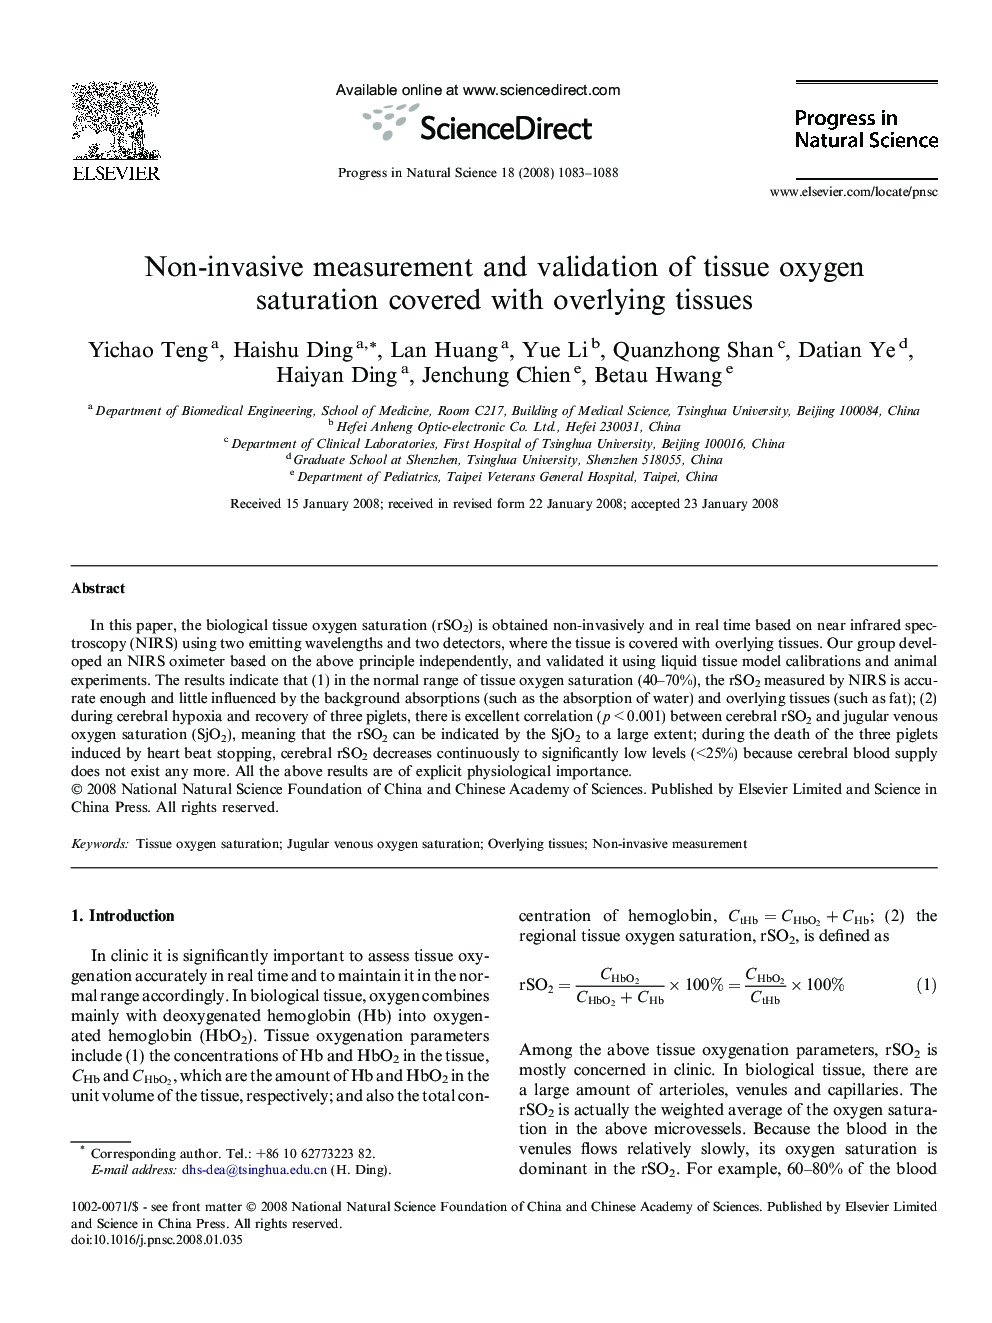 Non-invasive measurement and validation of tissue oxygen saturation covered with overlying tissues